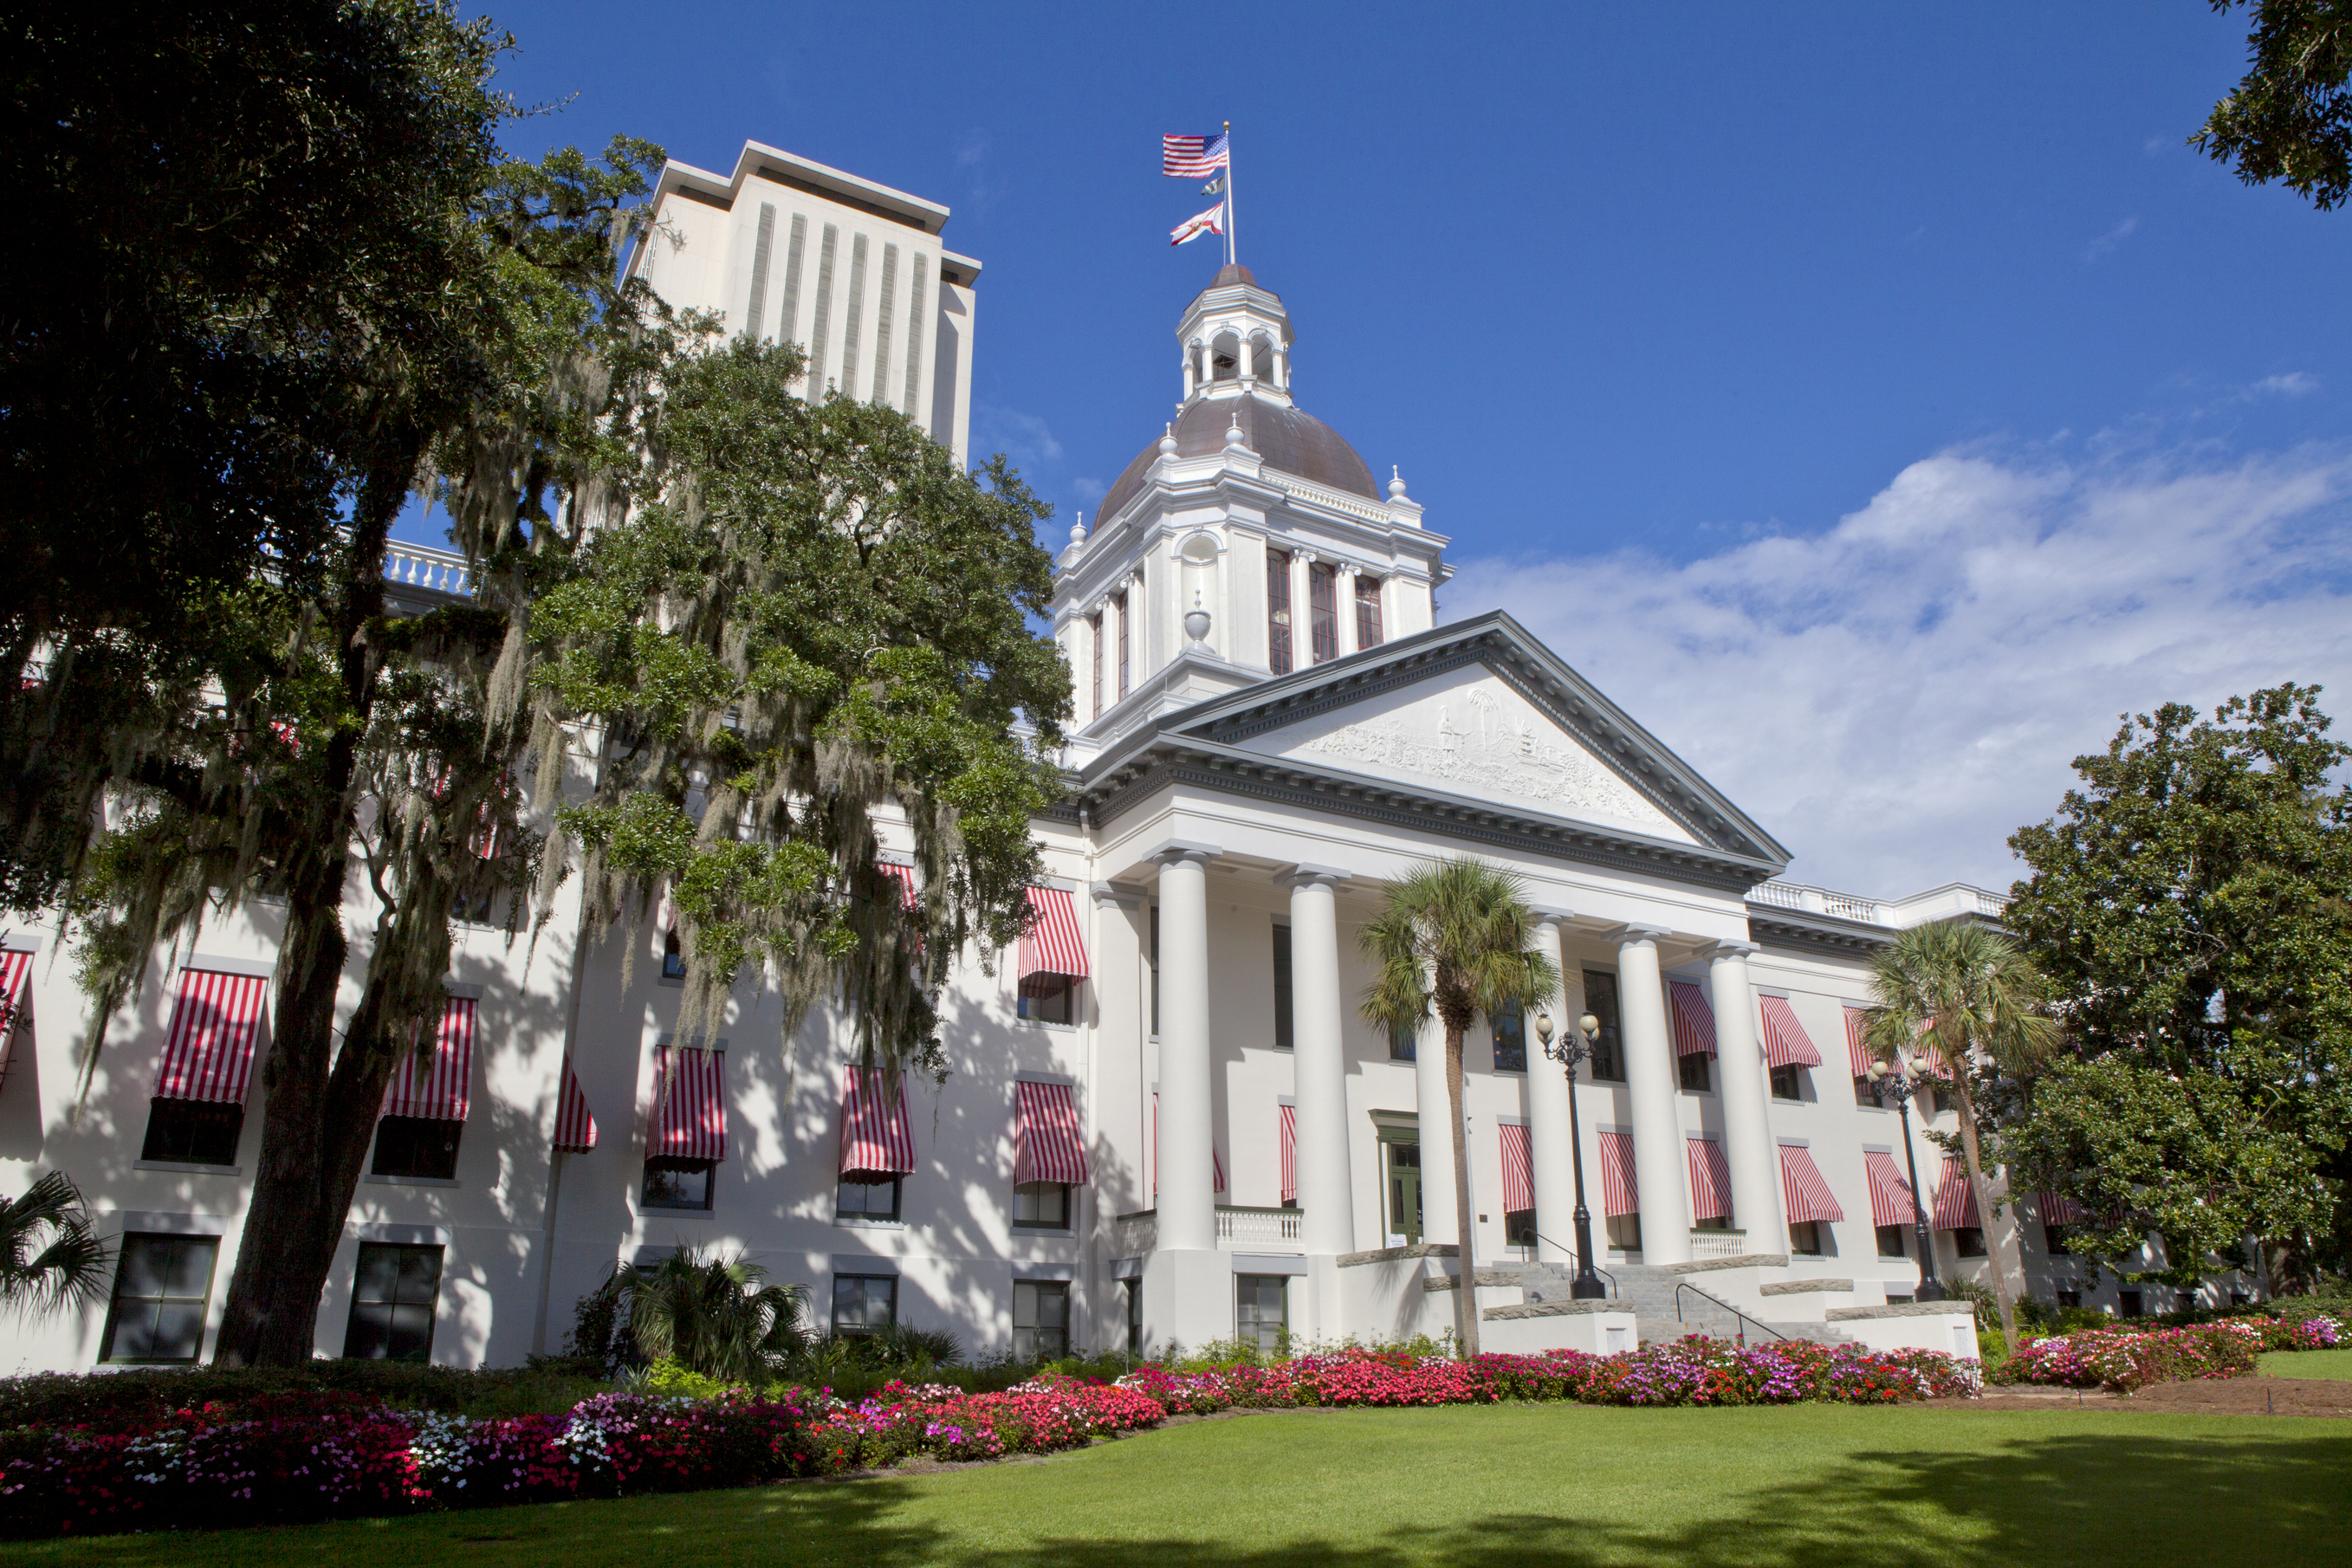 View of the Florida Stare Capitol in Tallahassee